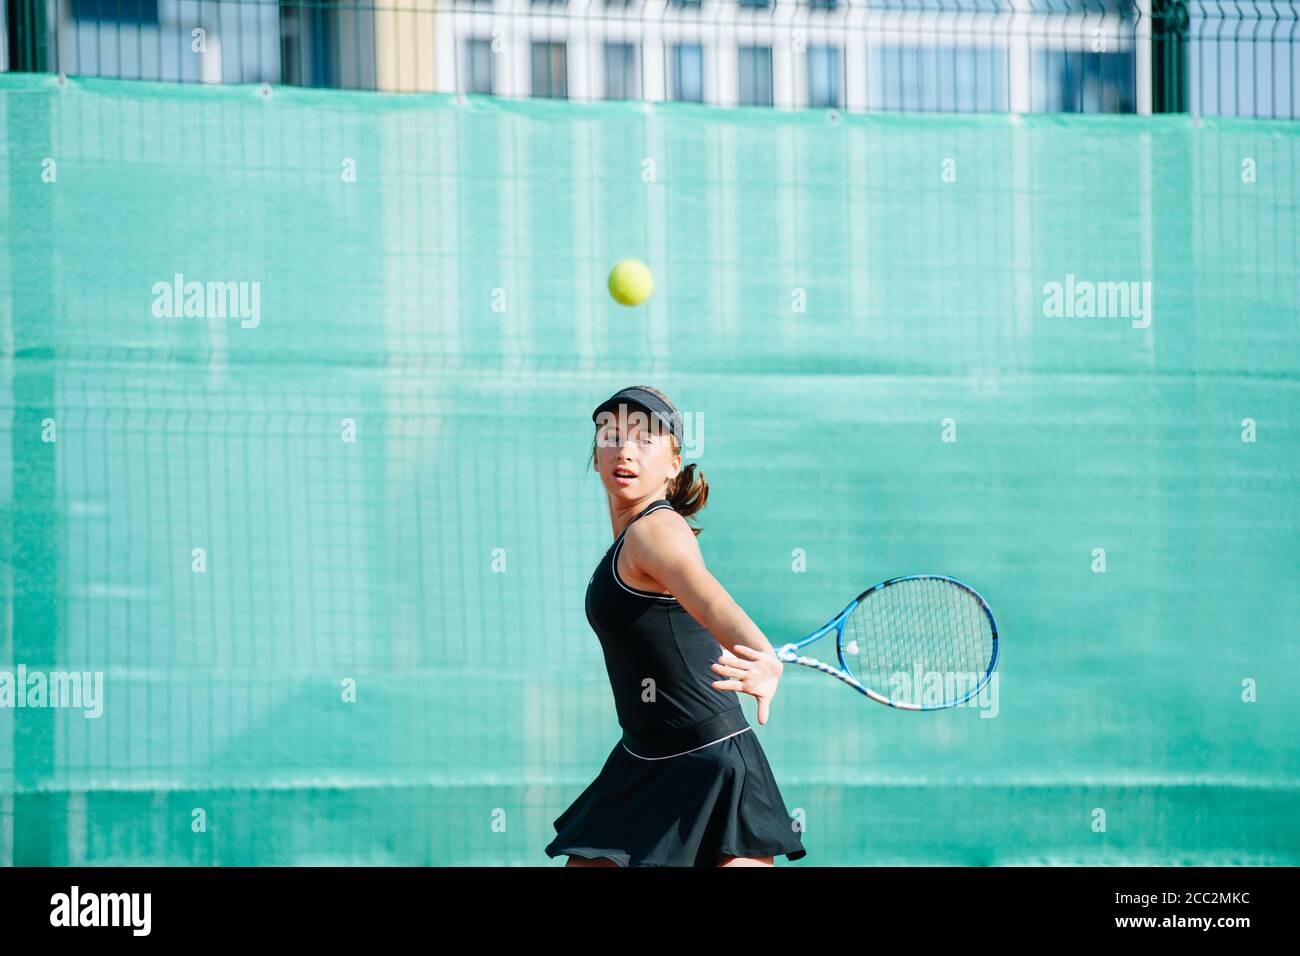 Teenage girl playing tennis on a new court, doing wide swing Stock Photo